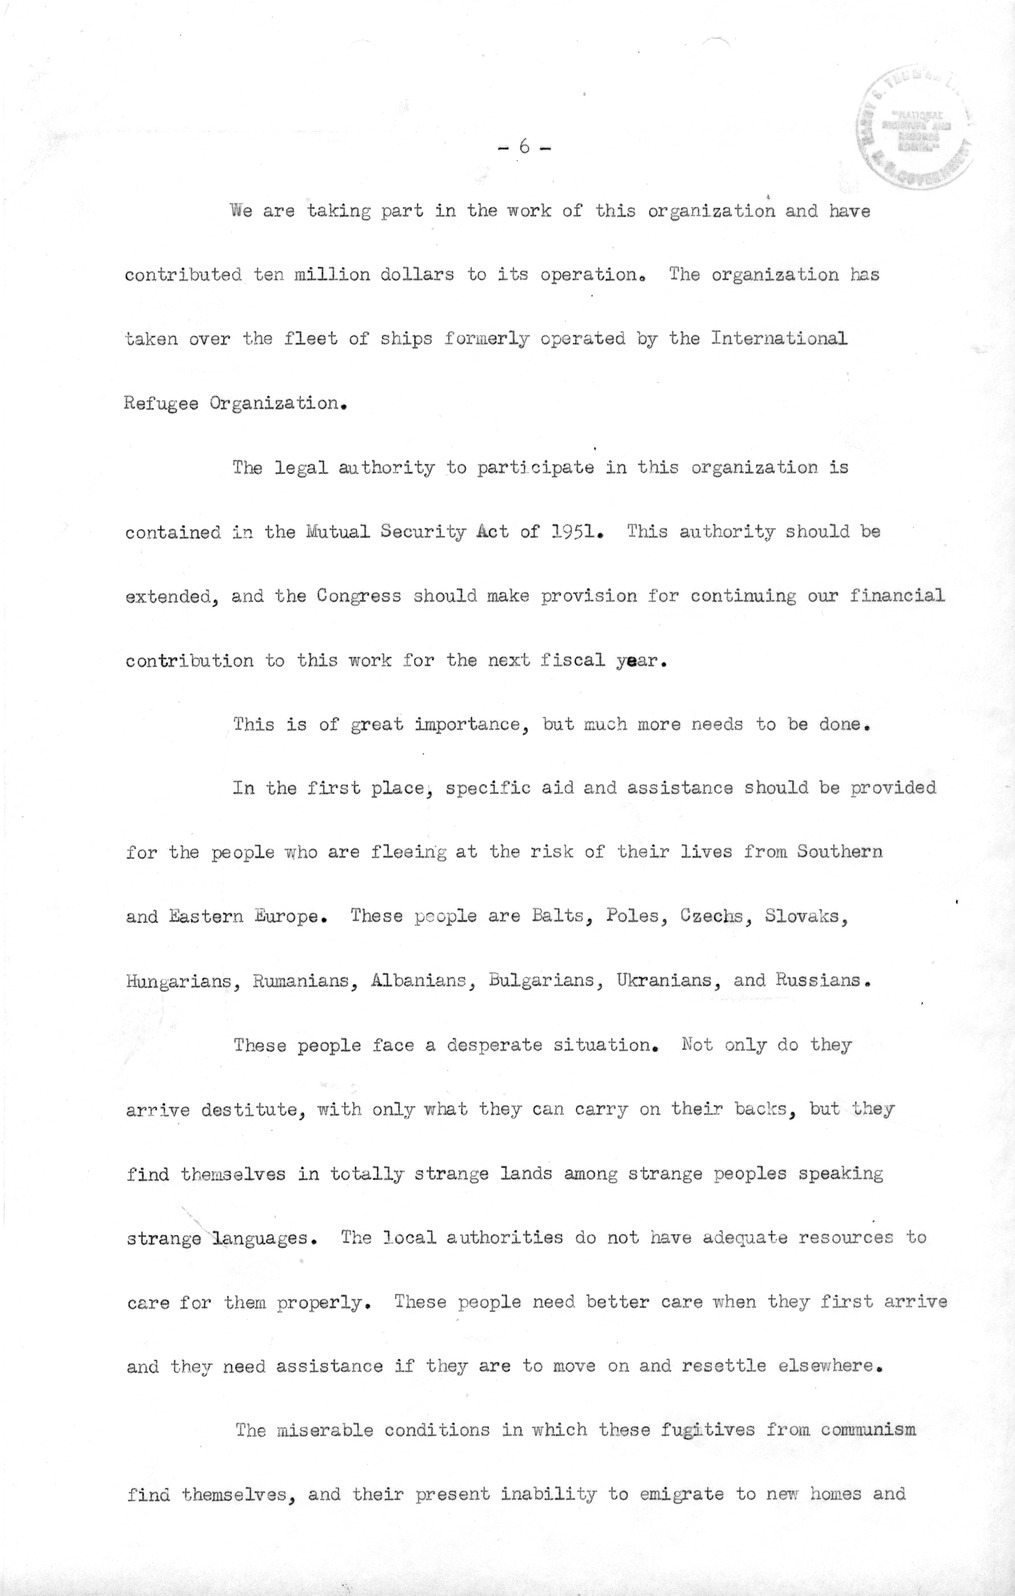 Memorandum from Richard Neustadt to Rufus Miles, with Attached Message Draft